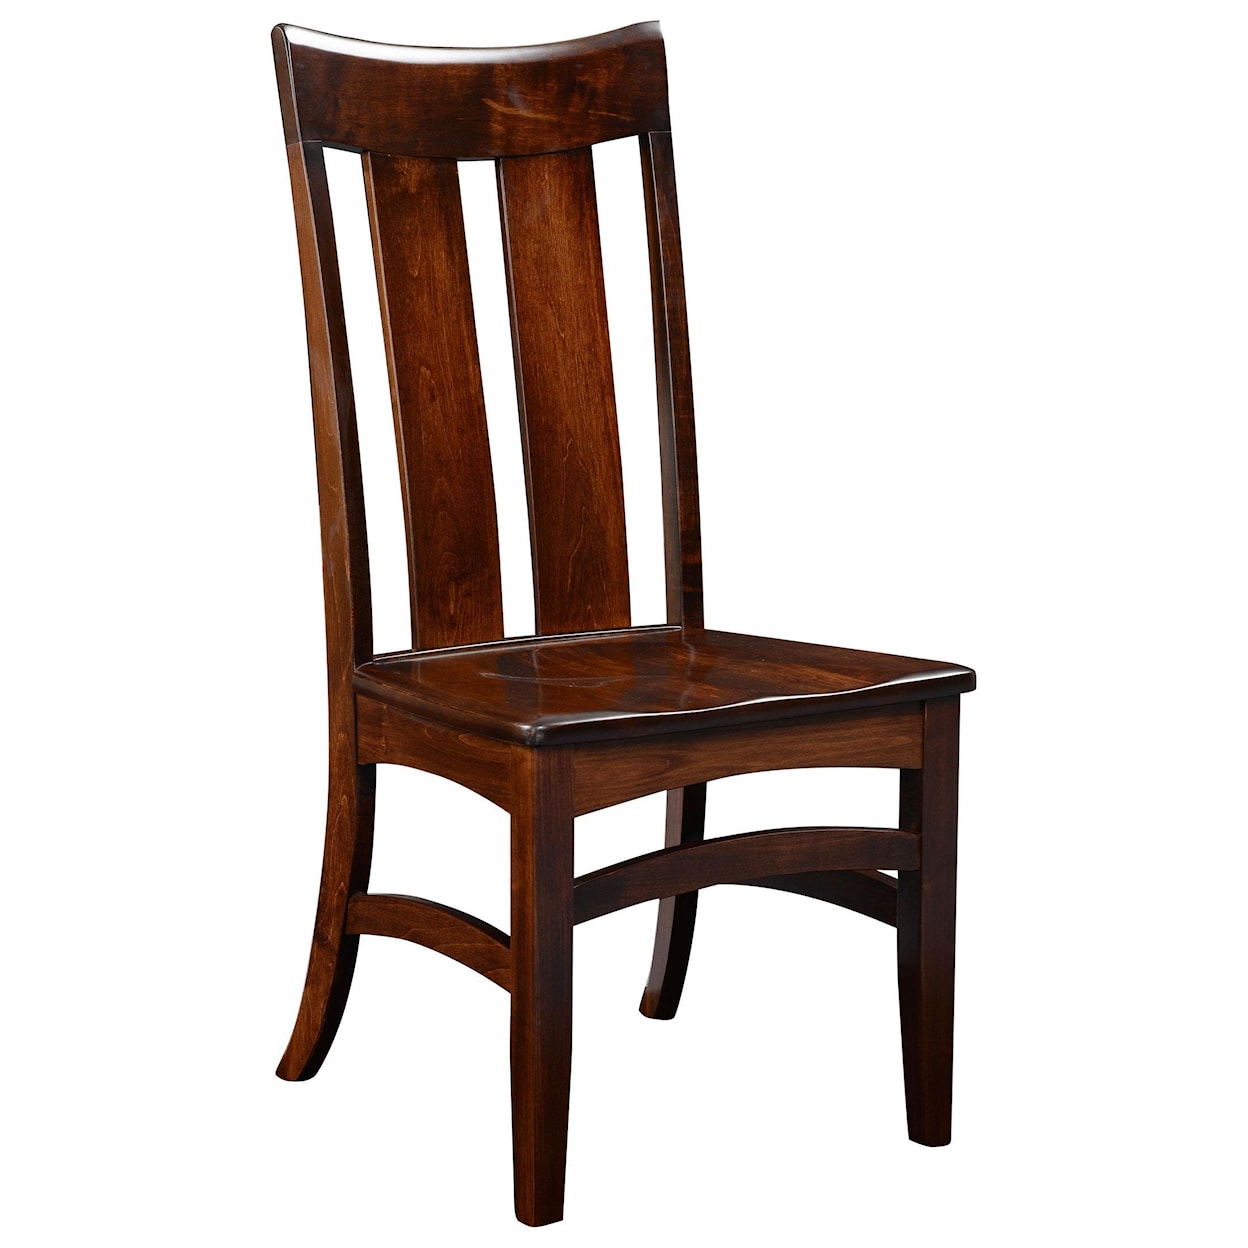 Wengerd Wood Products Galion Shaker Side Chair